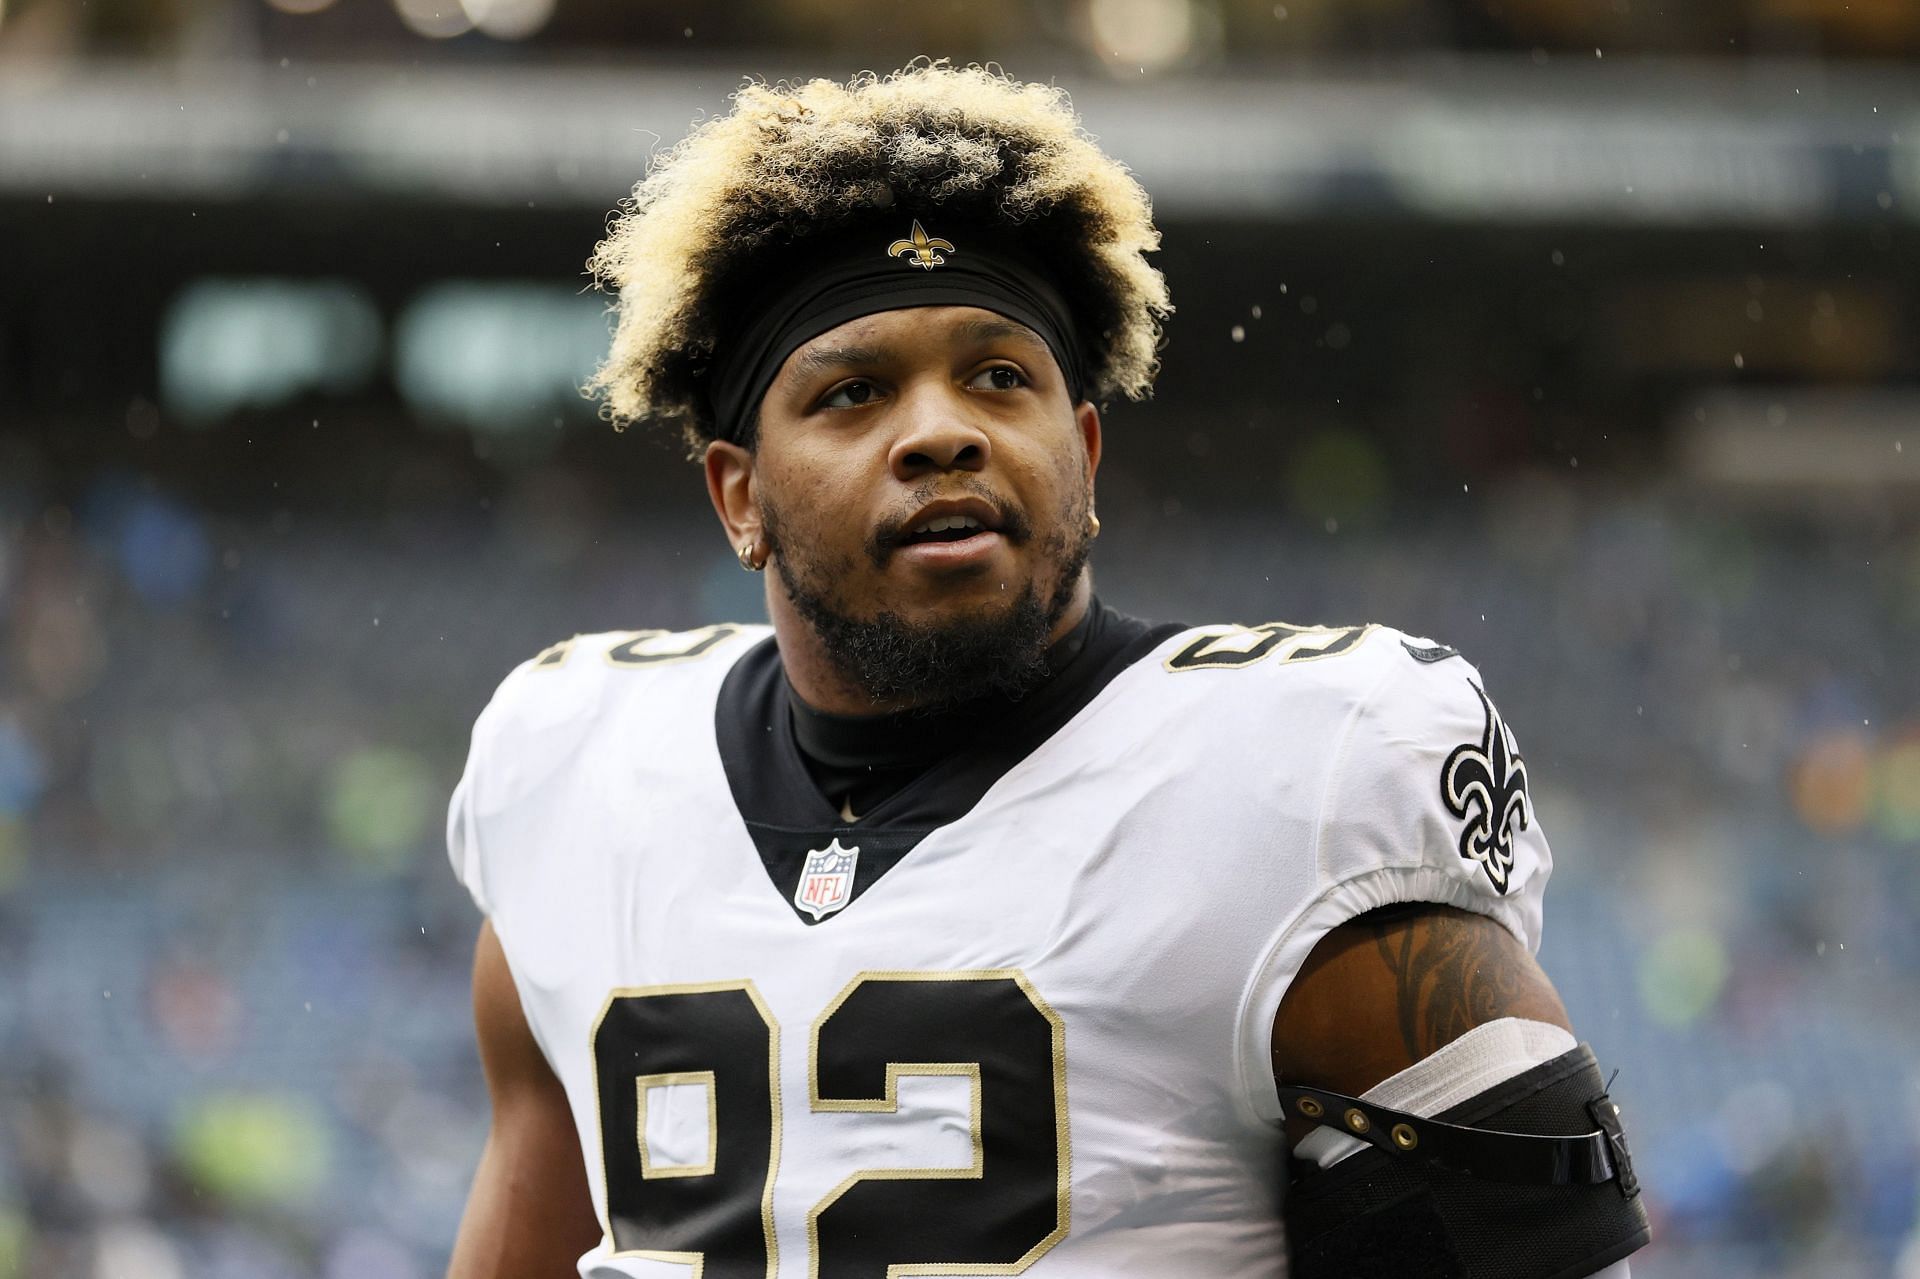 Marcus Davenport suffered a horrible injury on his finger during offseason